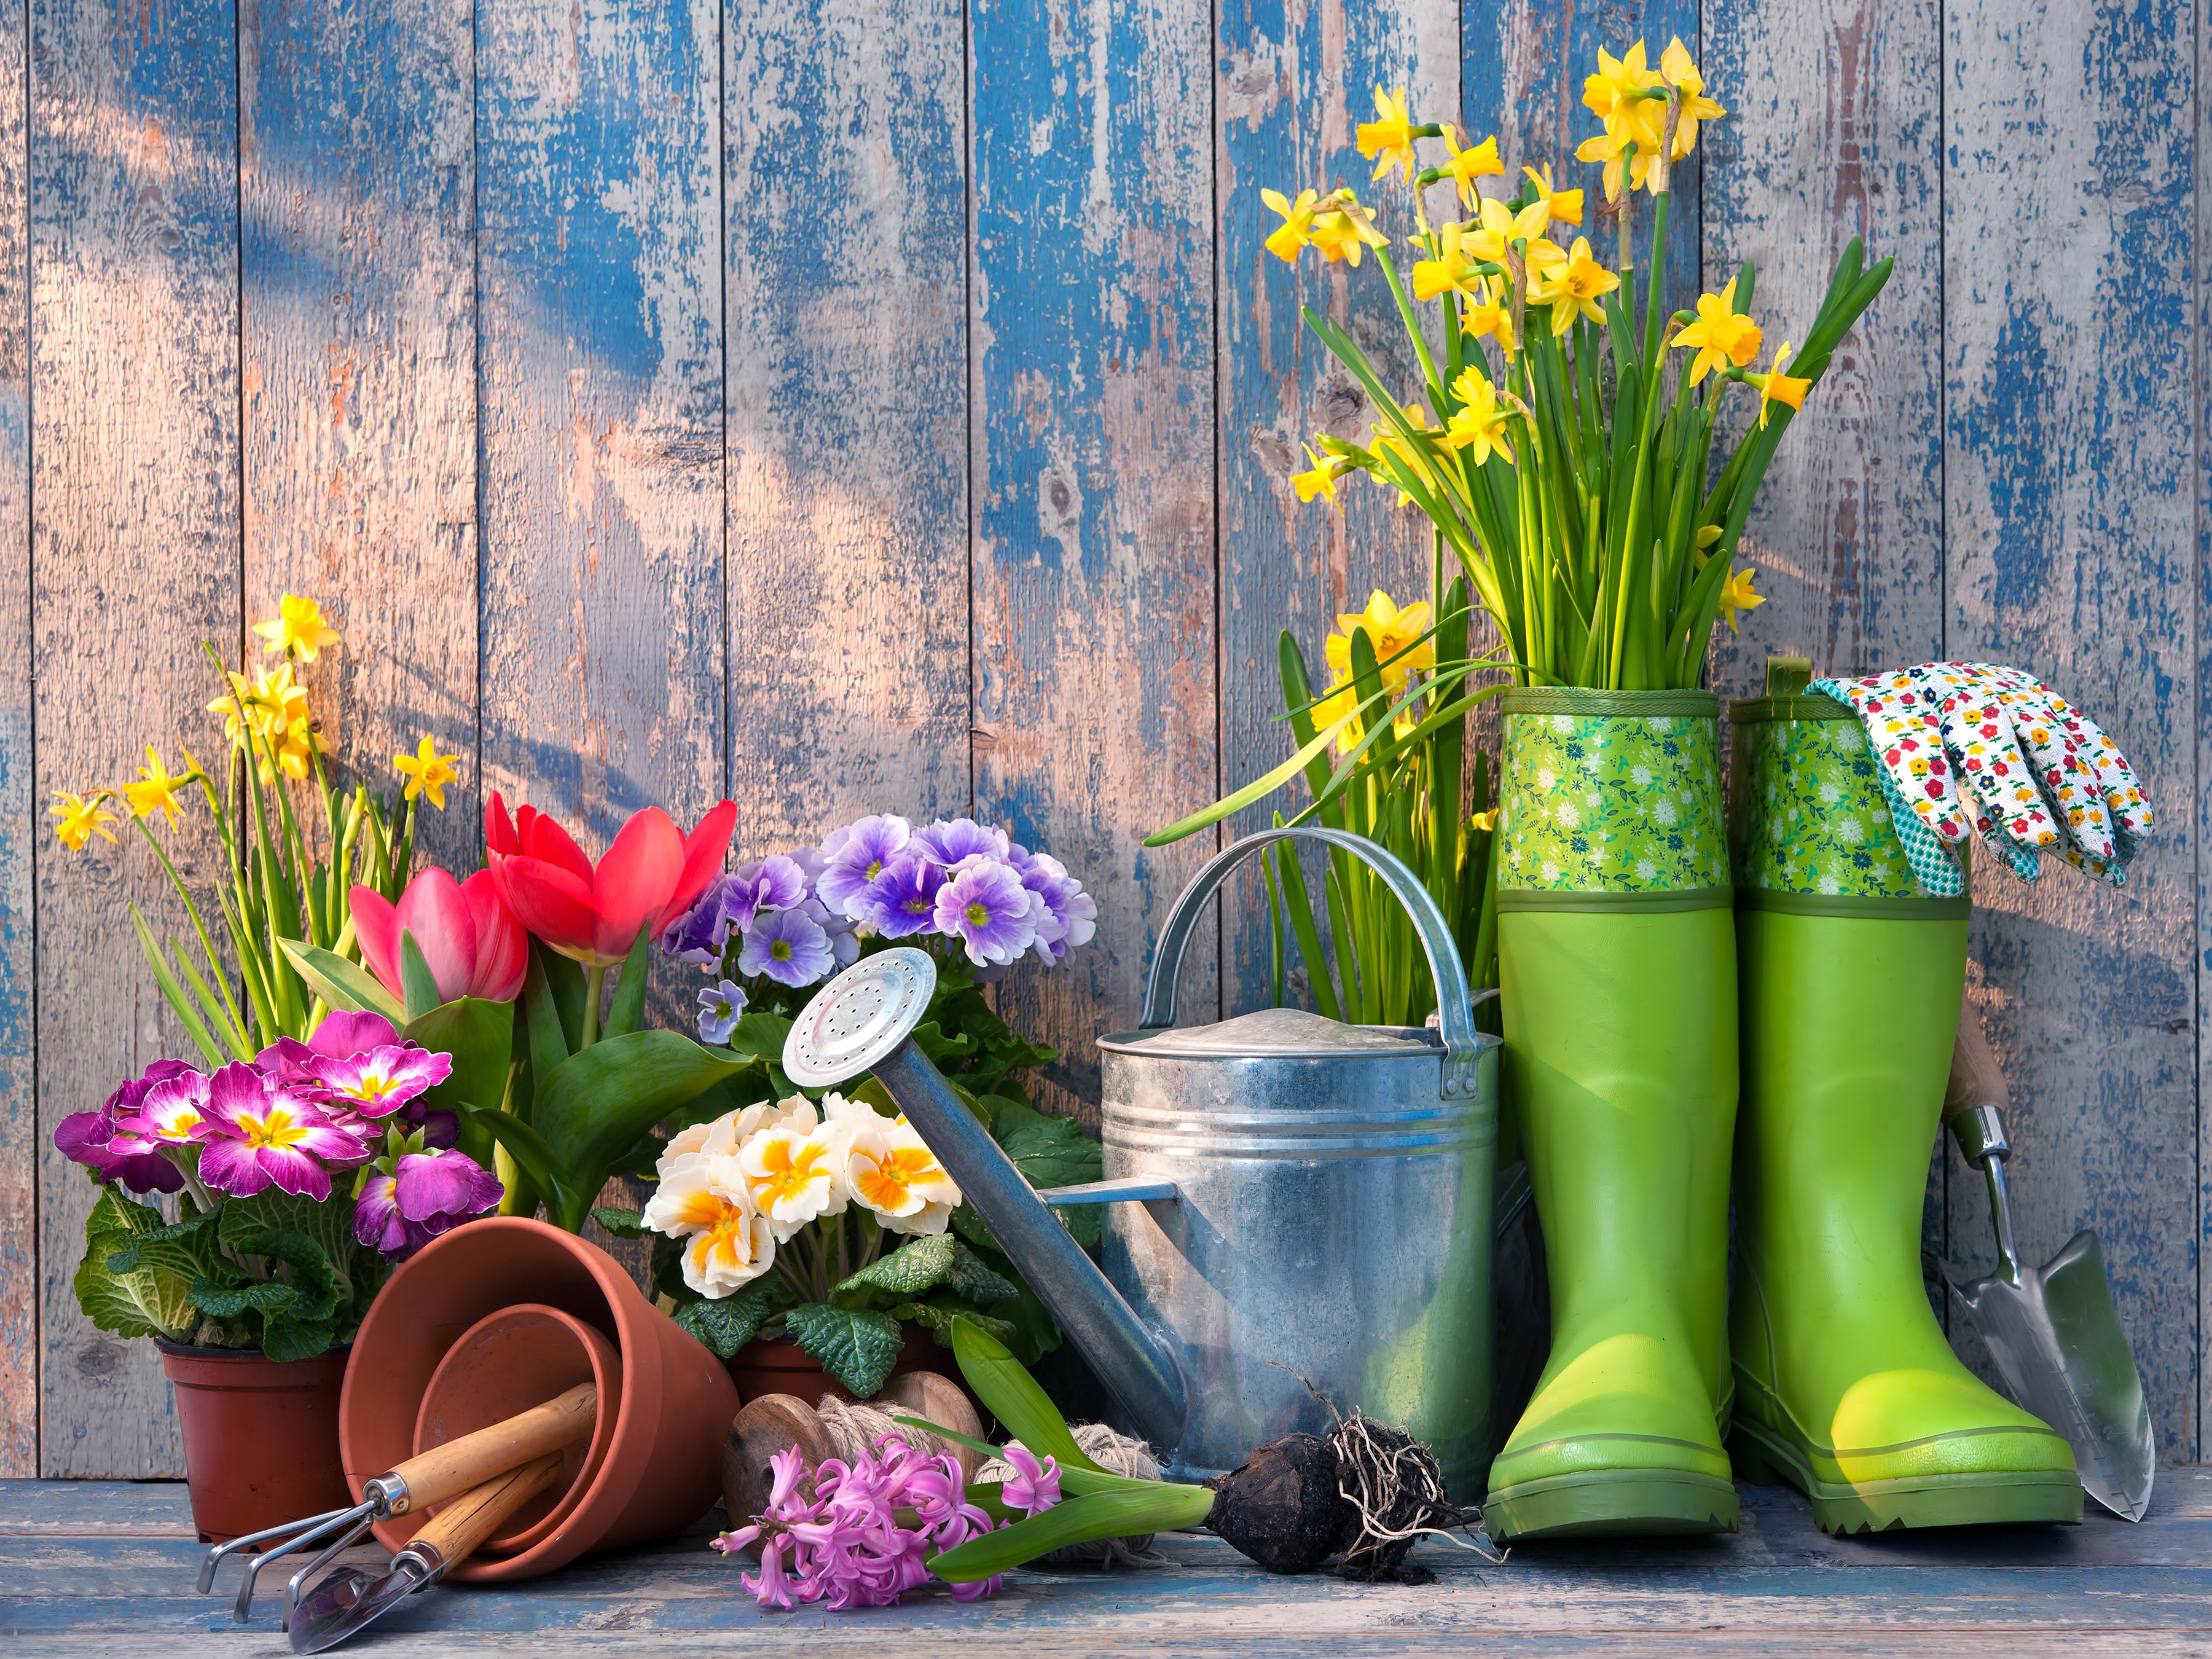 How to Get The Best Gardening Services in South London